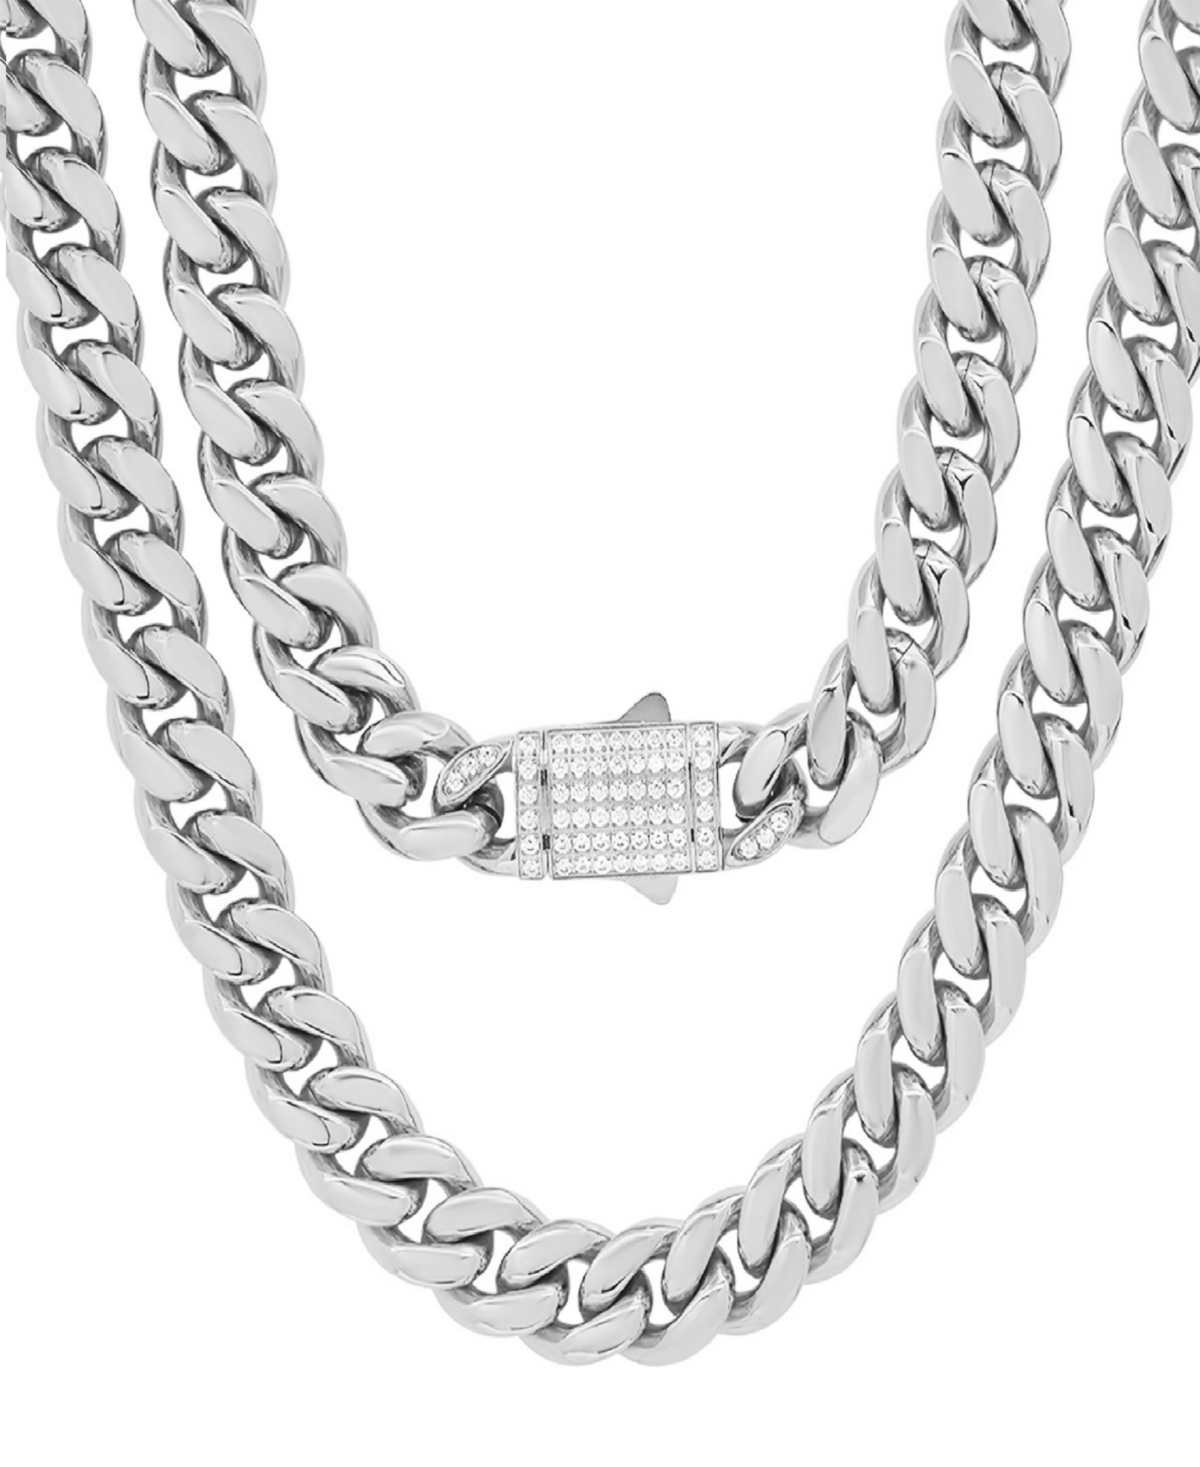 Thick Cuban Link Chain with Simulated Diamonds Clasp Necklace - Metallic